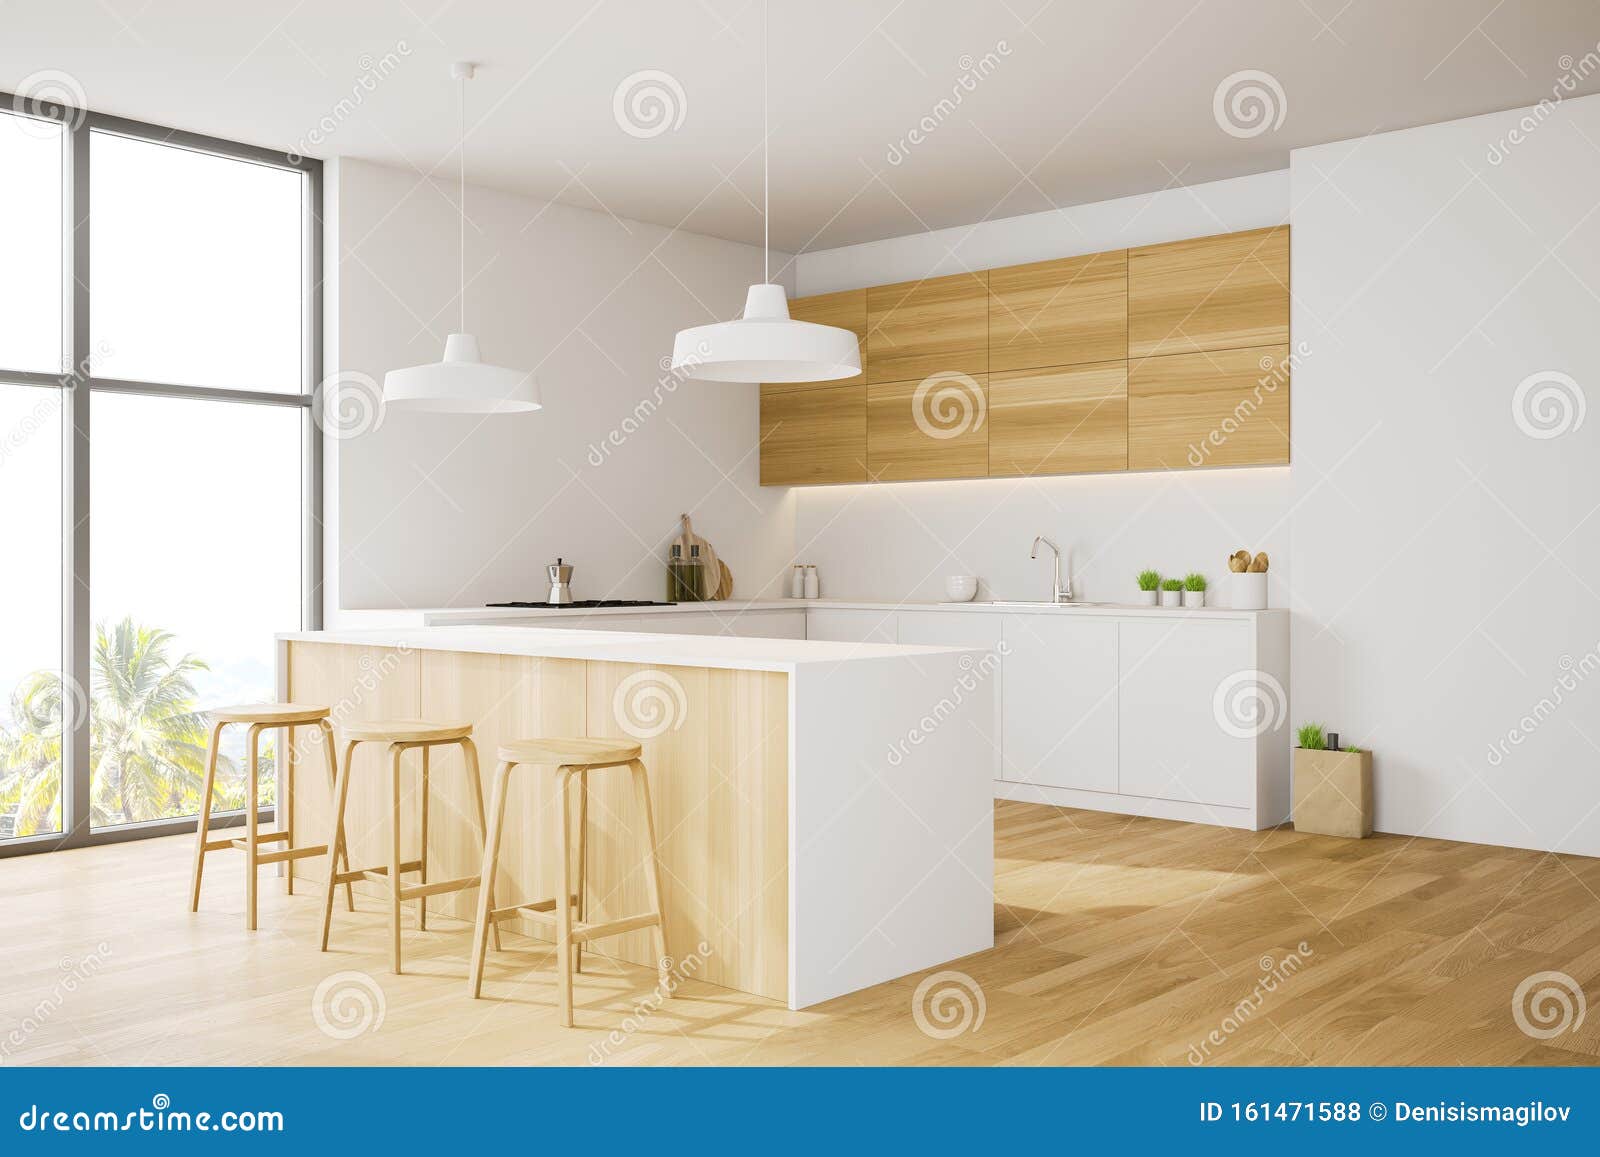 White And Wooden Kitchen Corner With Bar Stock Illustration